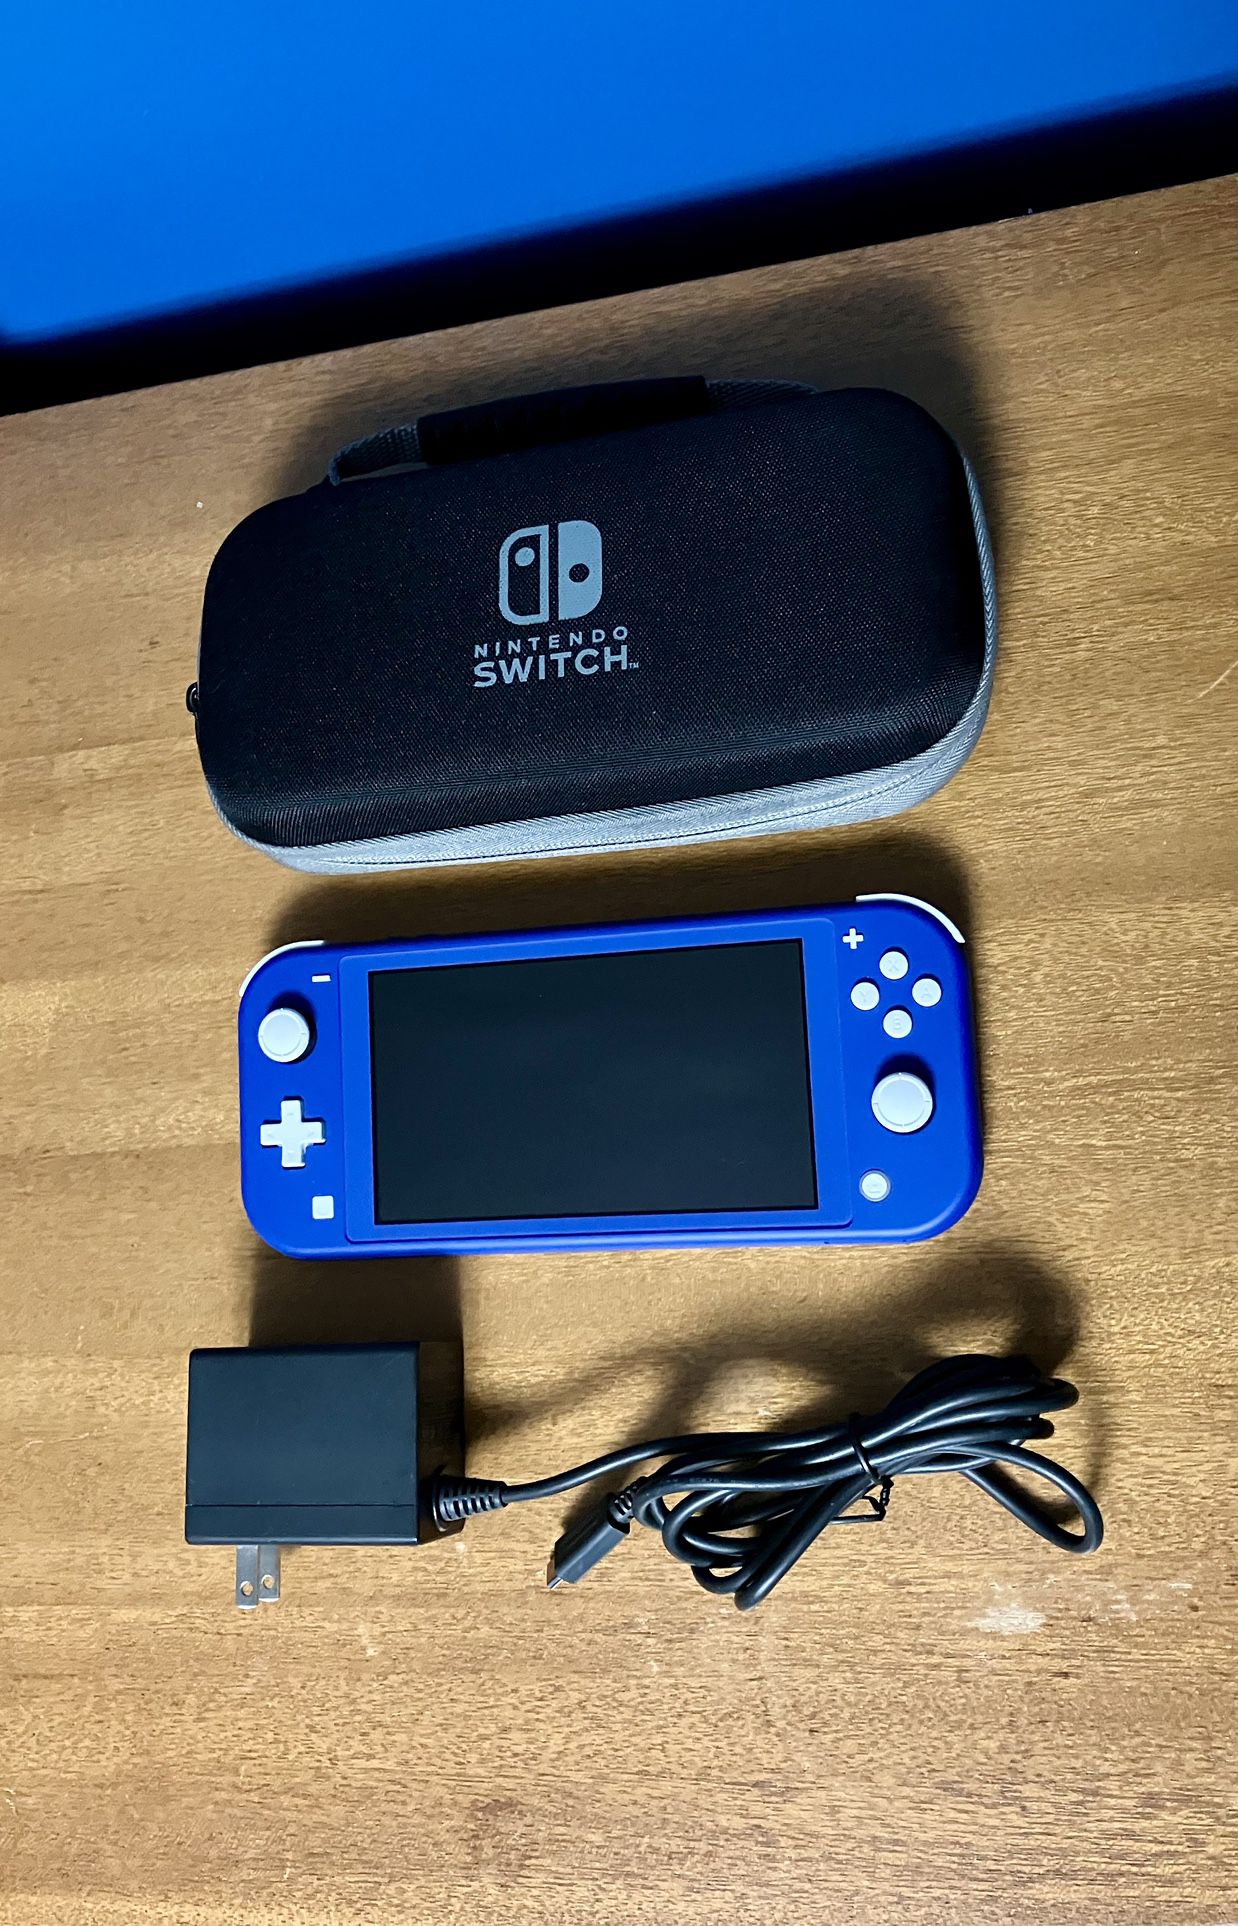 Nintendo Switch Lite video game system with Original Charger + Travel Carrying Case Blue color Like New